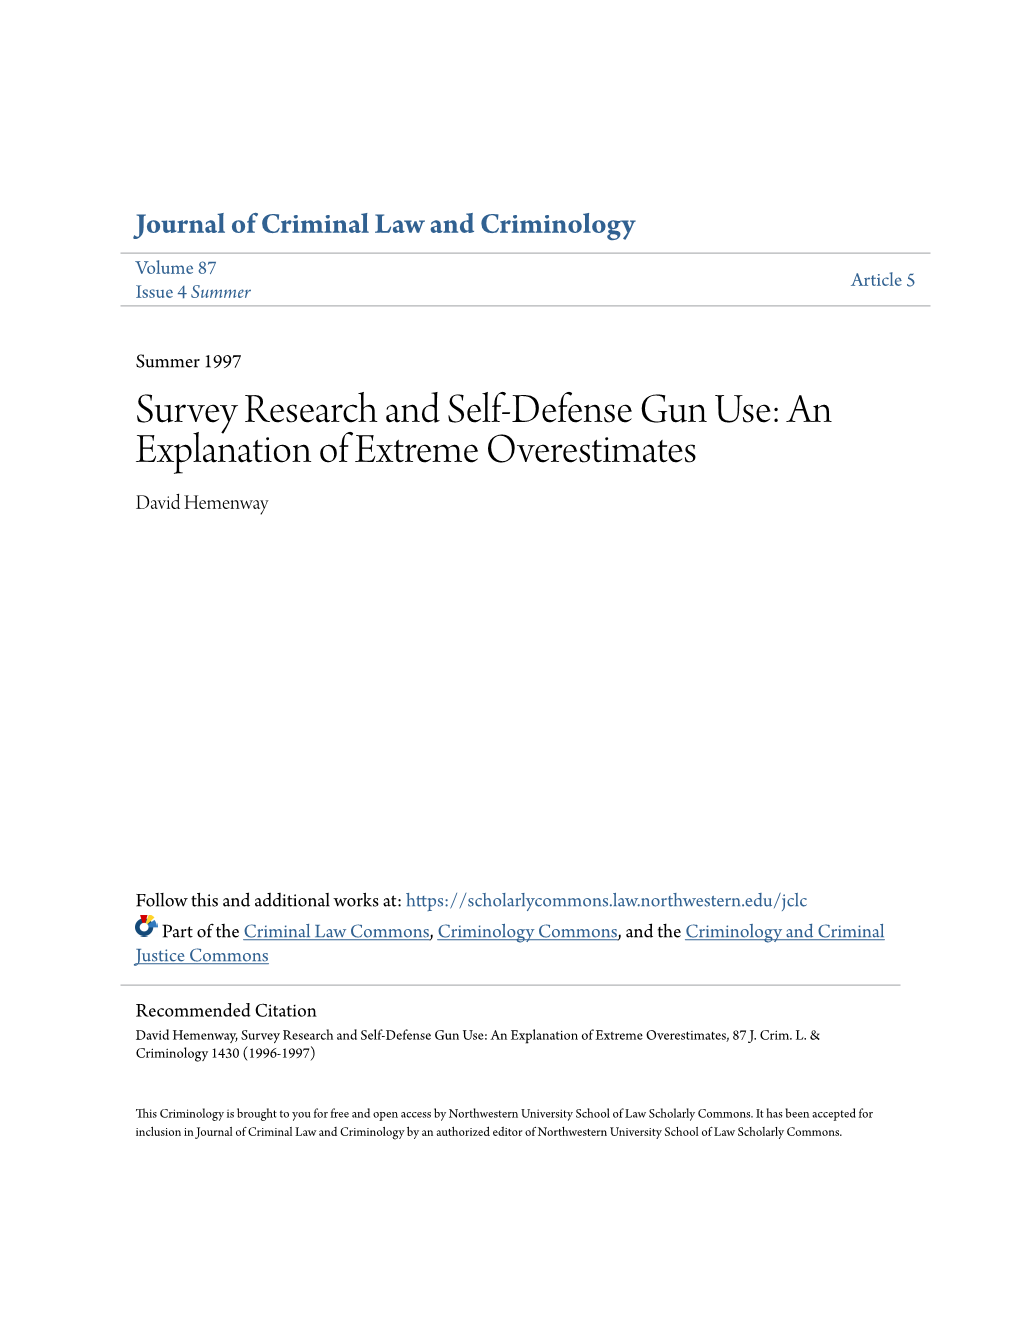 Survey Research and Self-Defense Gun Use: an Explanation of Extreme Overestimates David Hemenway